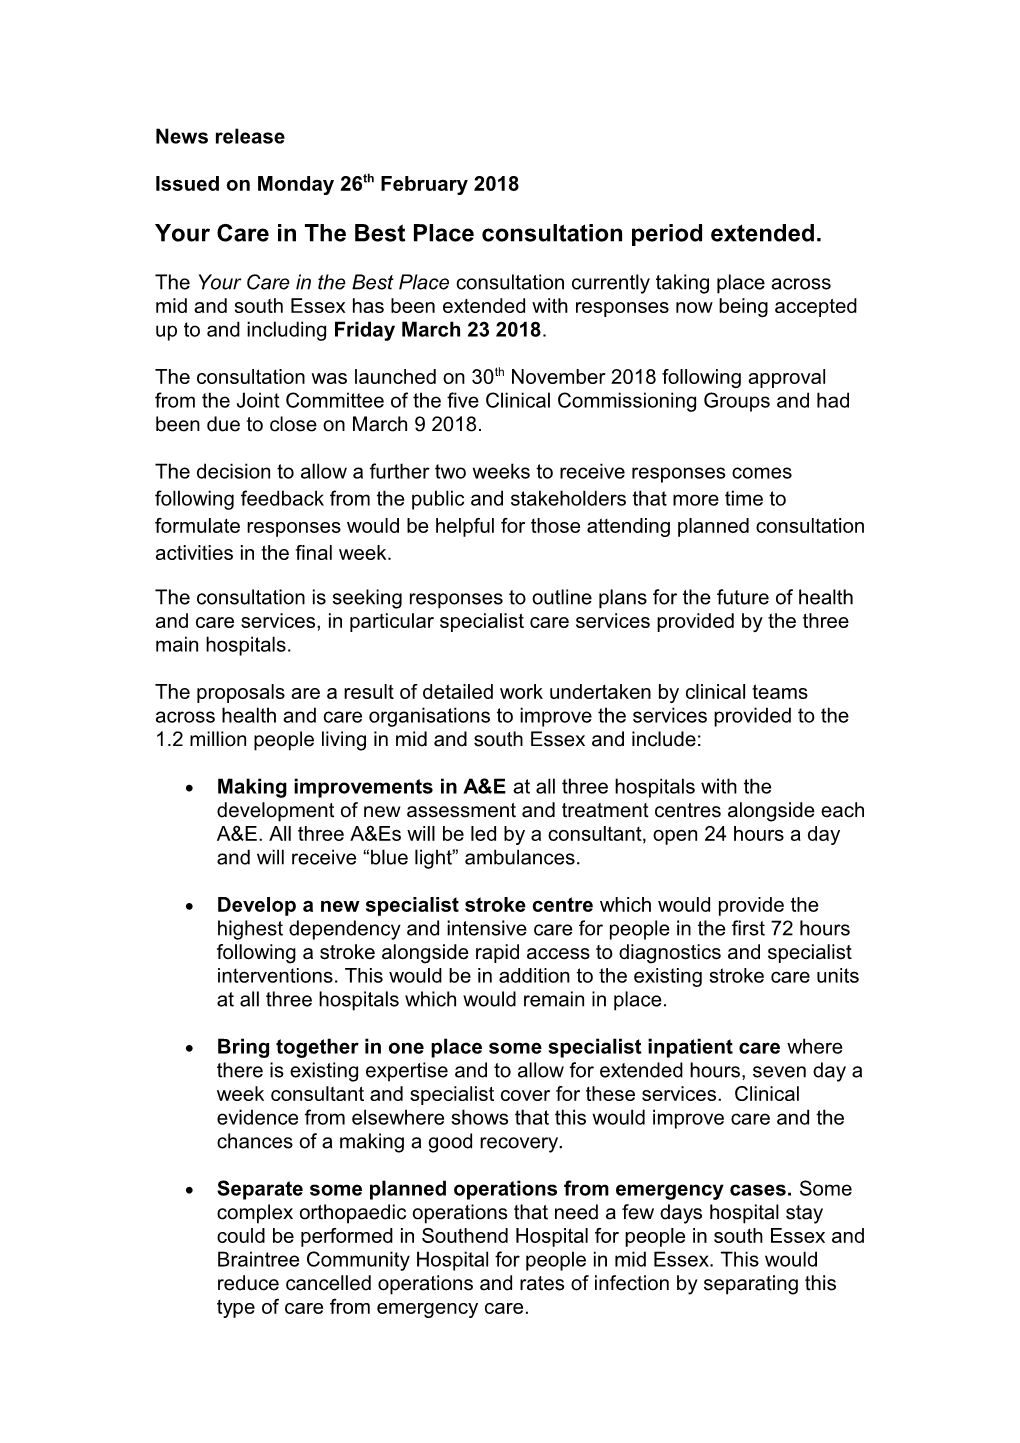 Your Care in the Best Place Consultation Period Extended